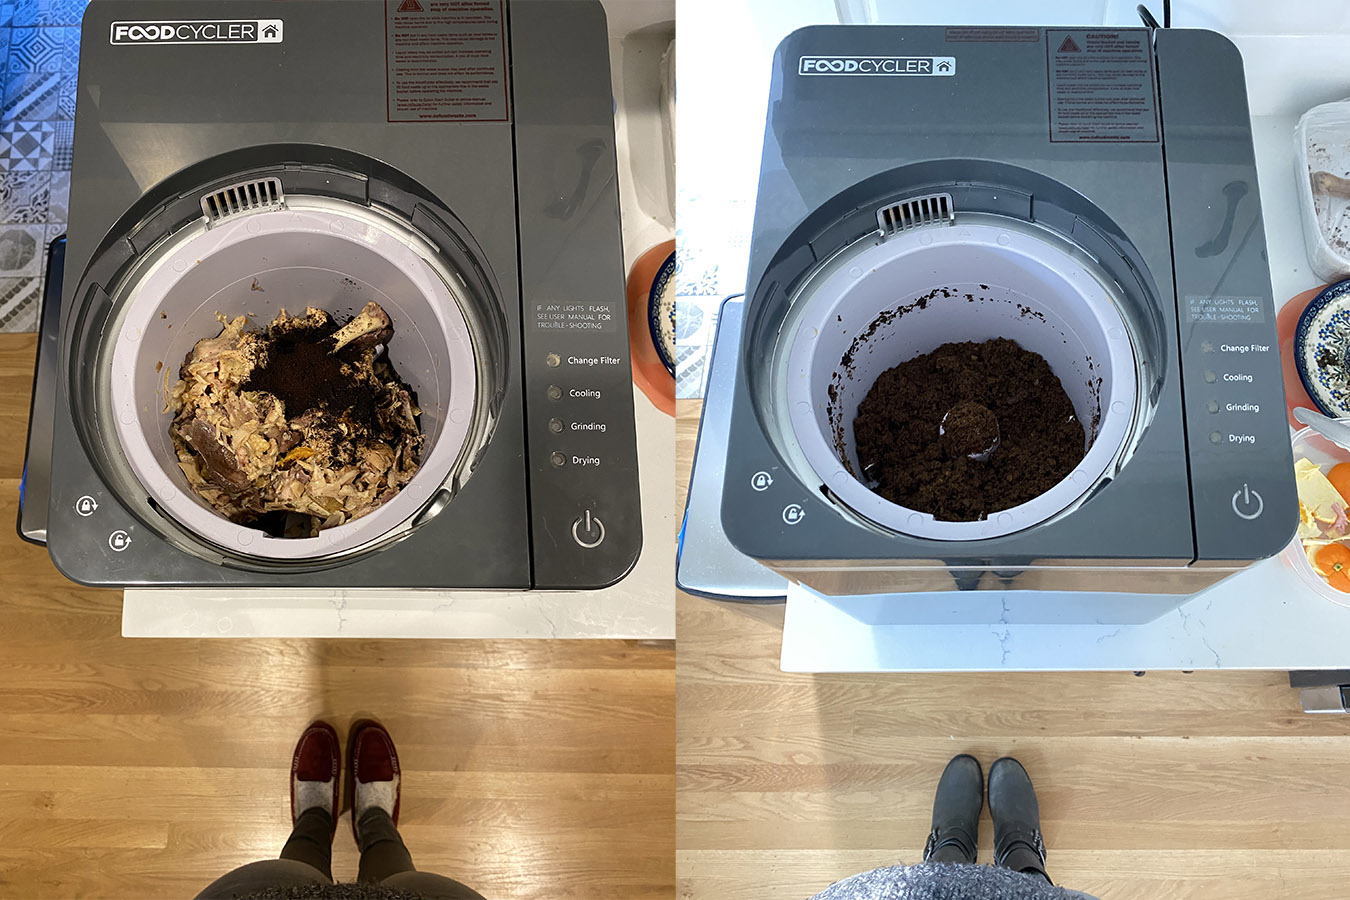 https://www.lucismorsels.com/wp-content/uploads/2020/01/Electric-Composter-Before-After-3.jpg